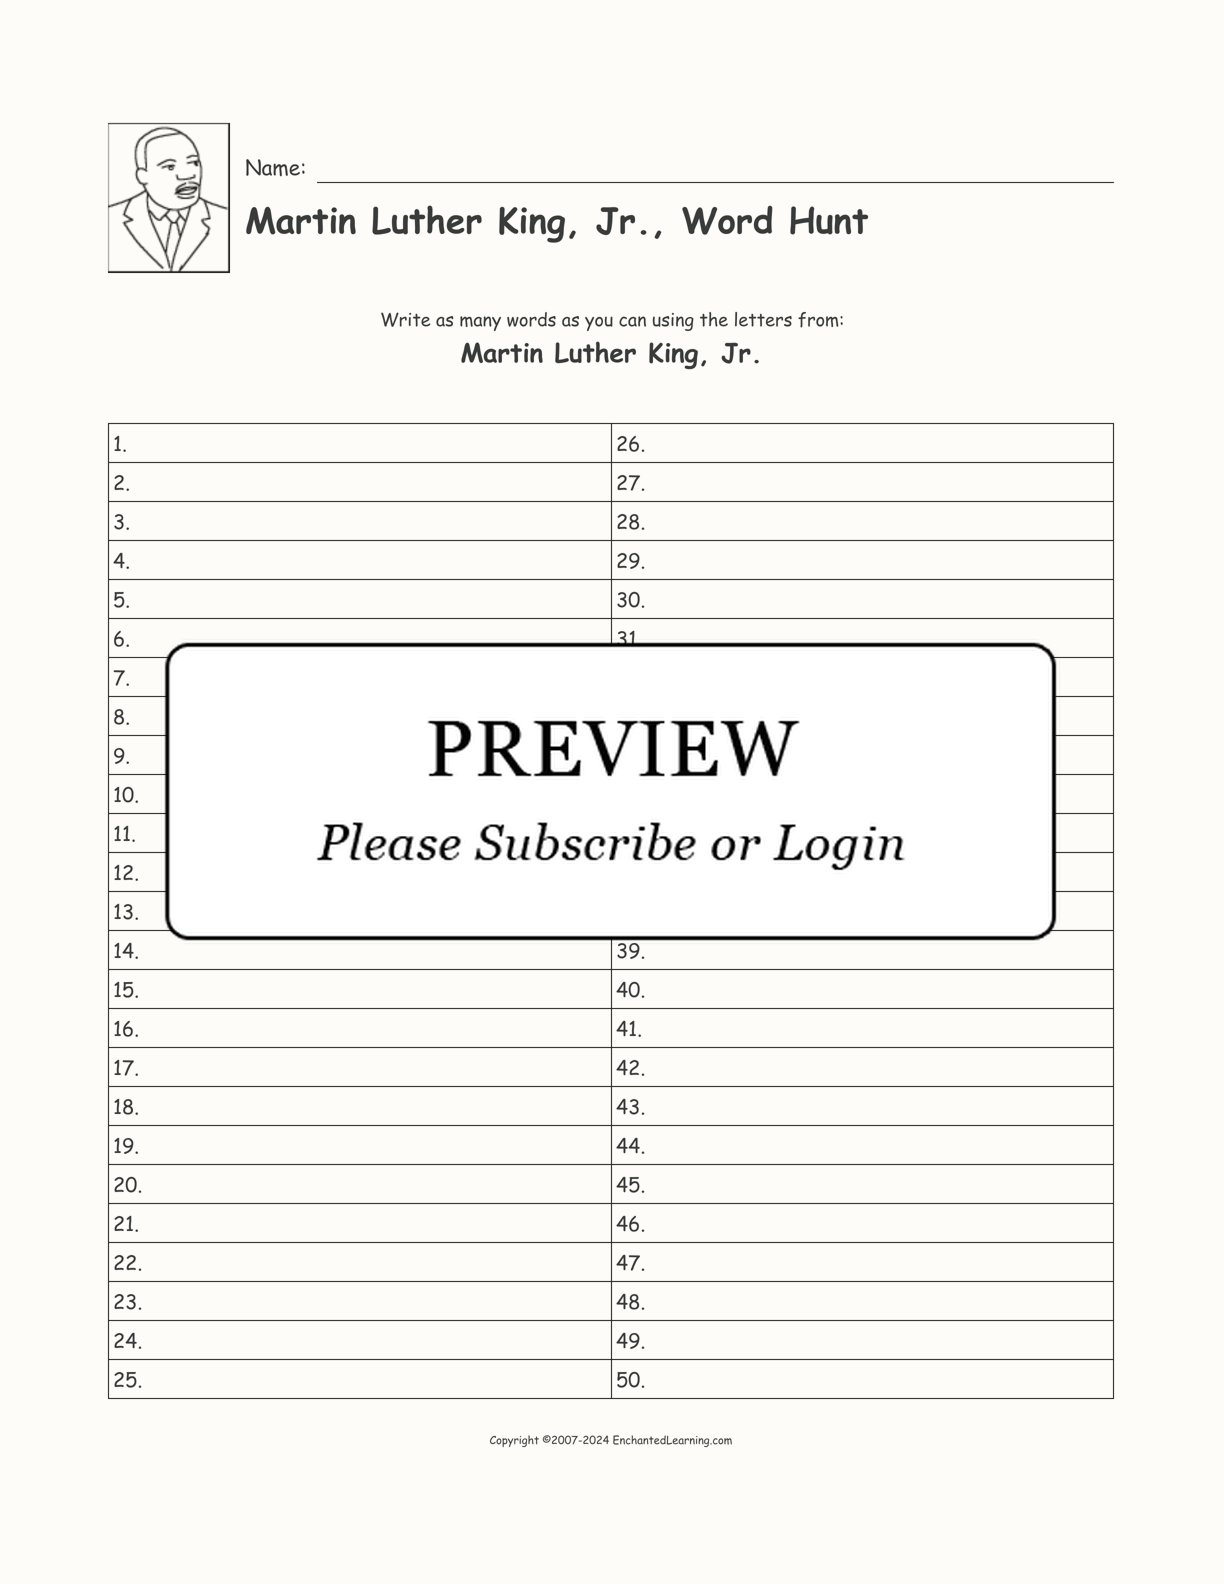 Martin Luther King, Jr., Word Hunt interactive worksheet page 1